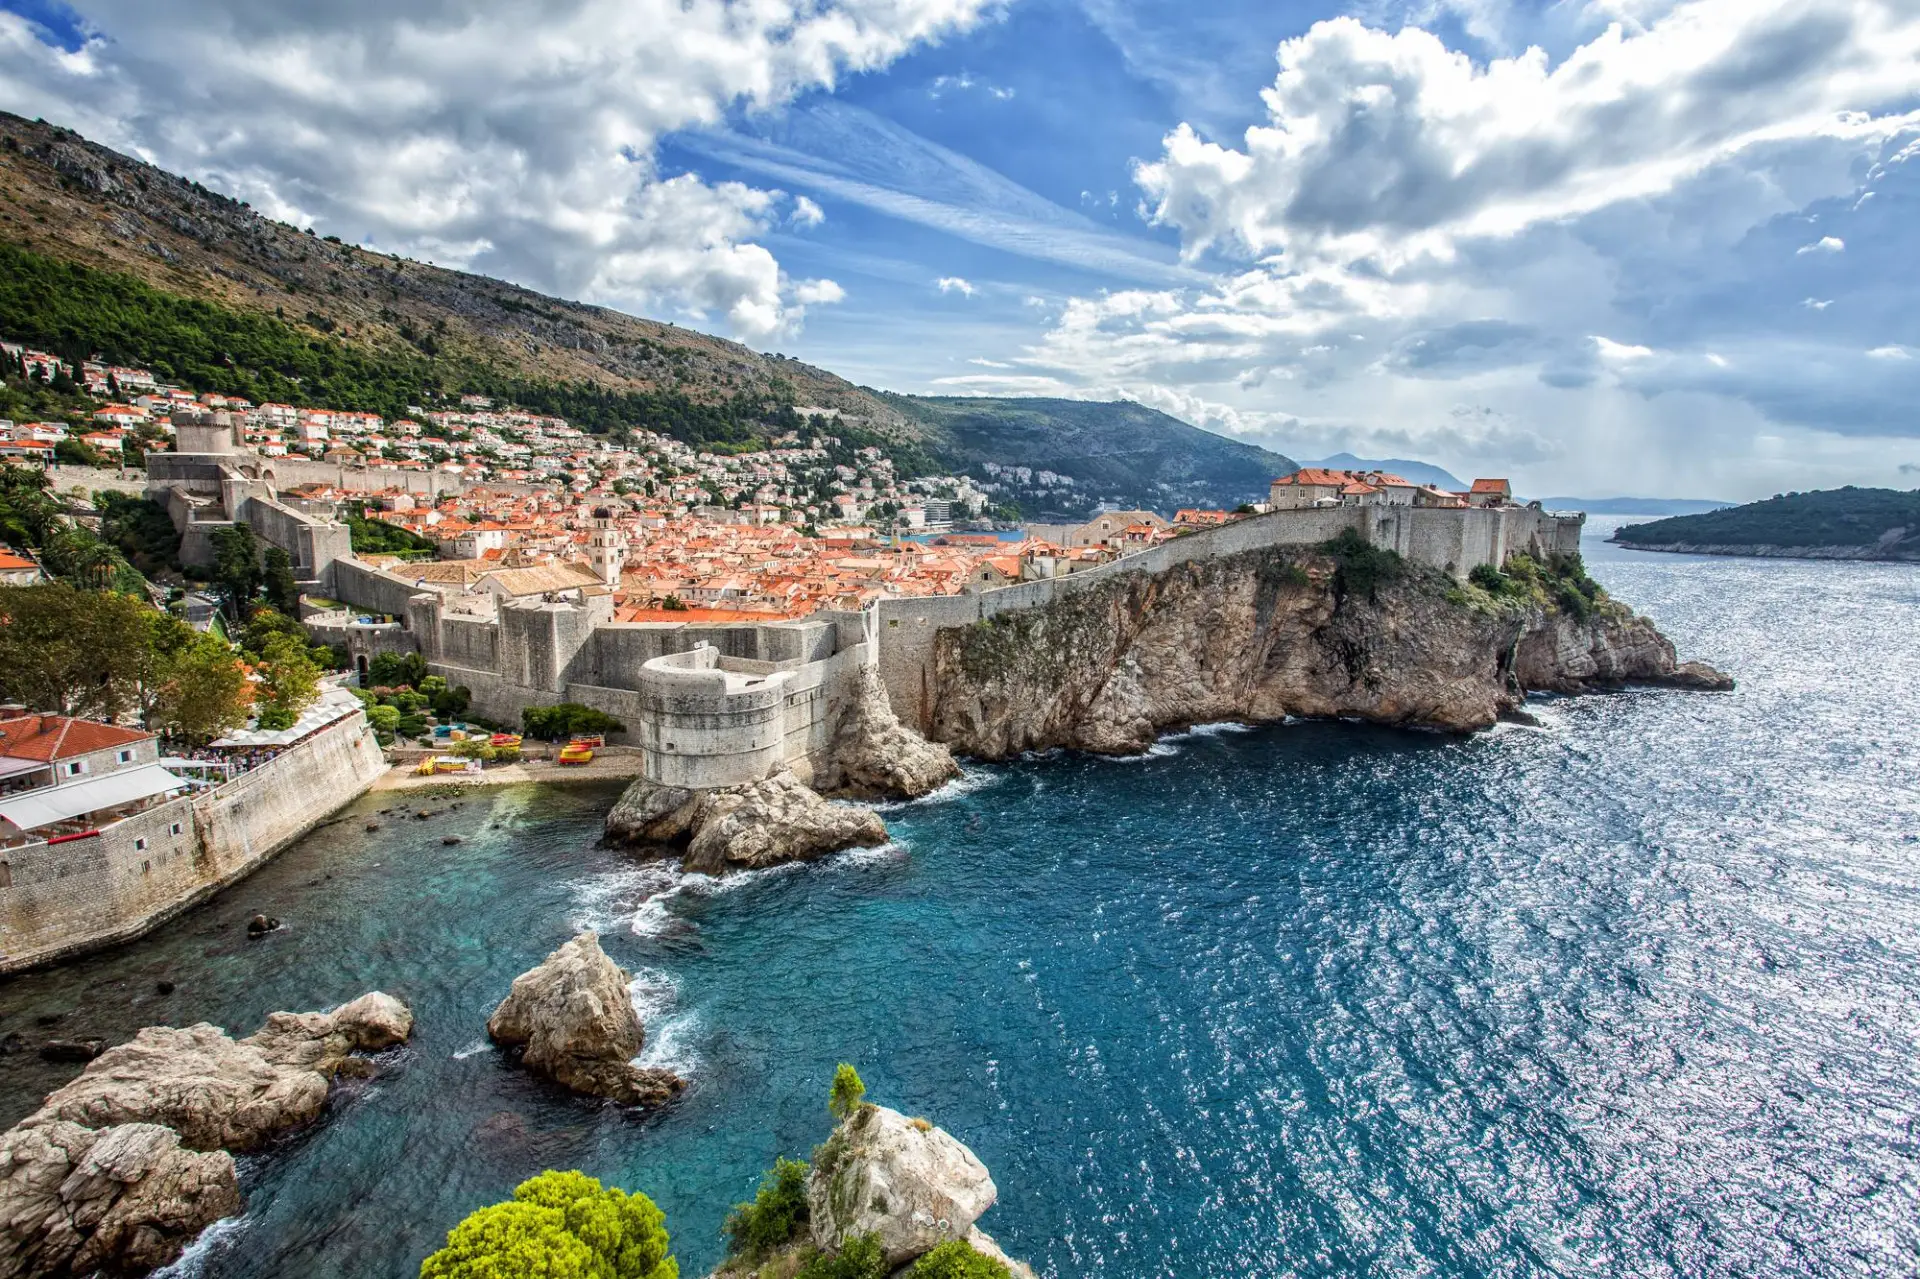 Places to see and things to do in Dubrovnik